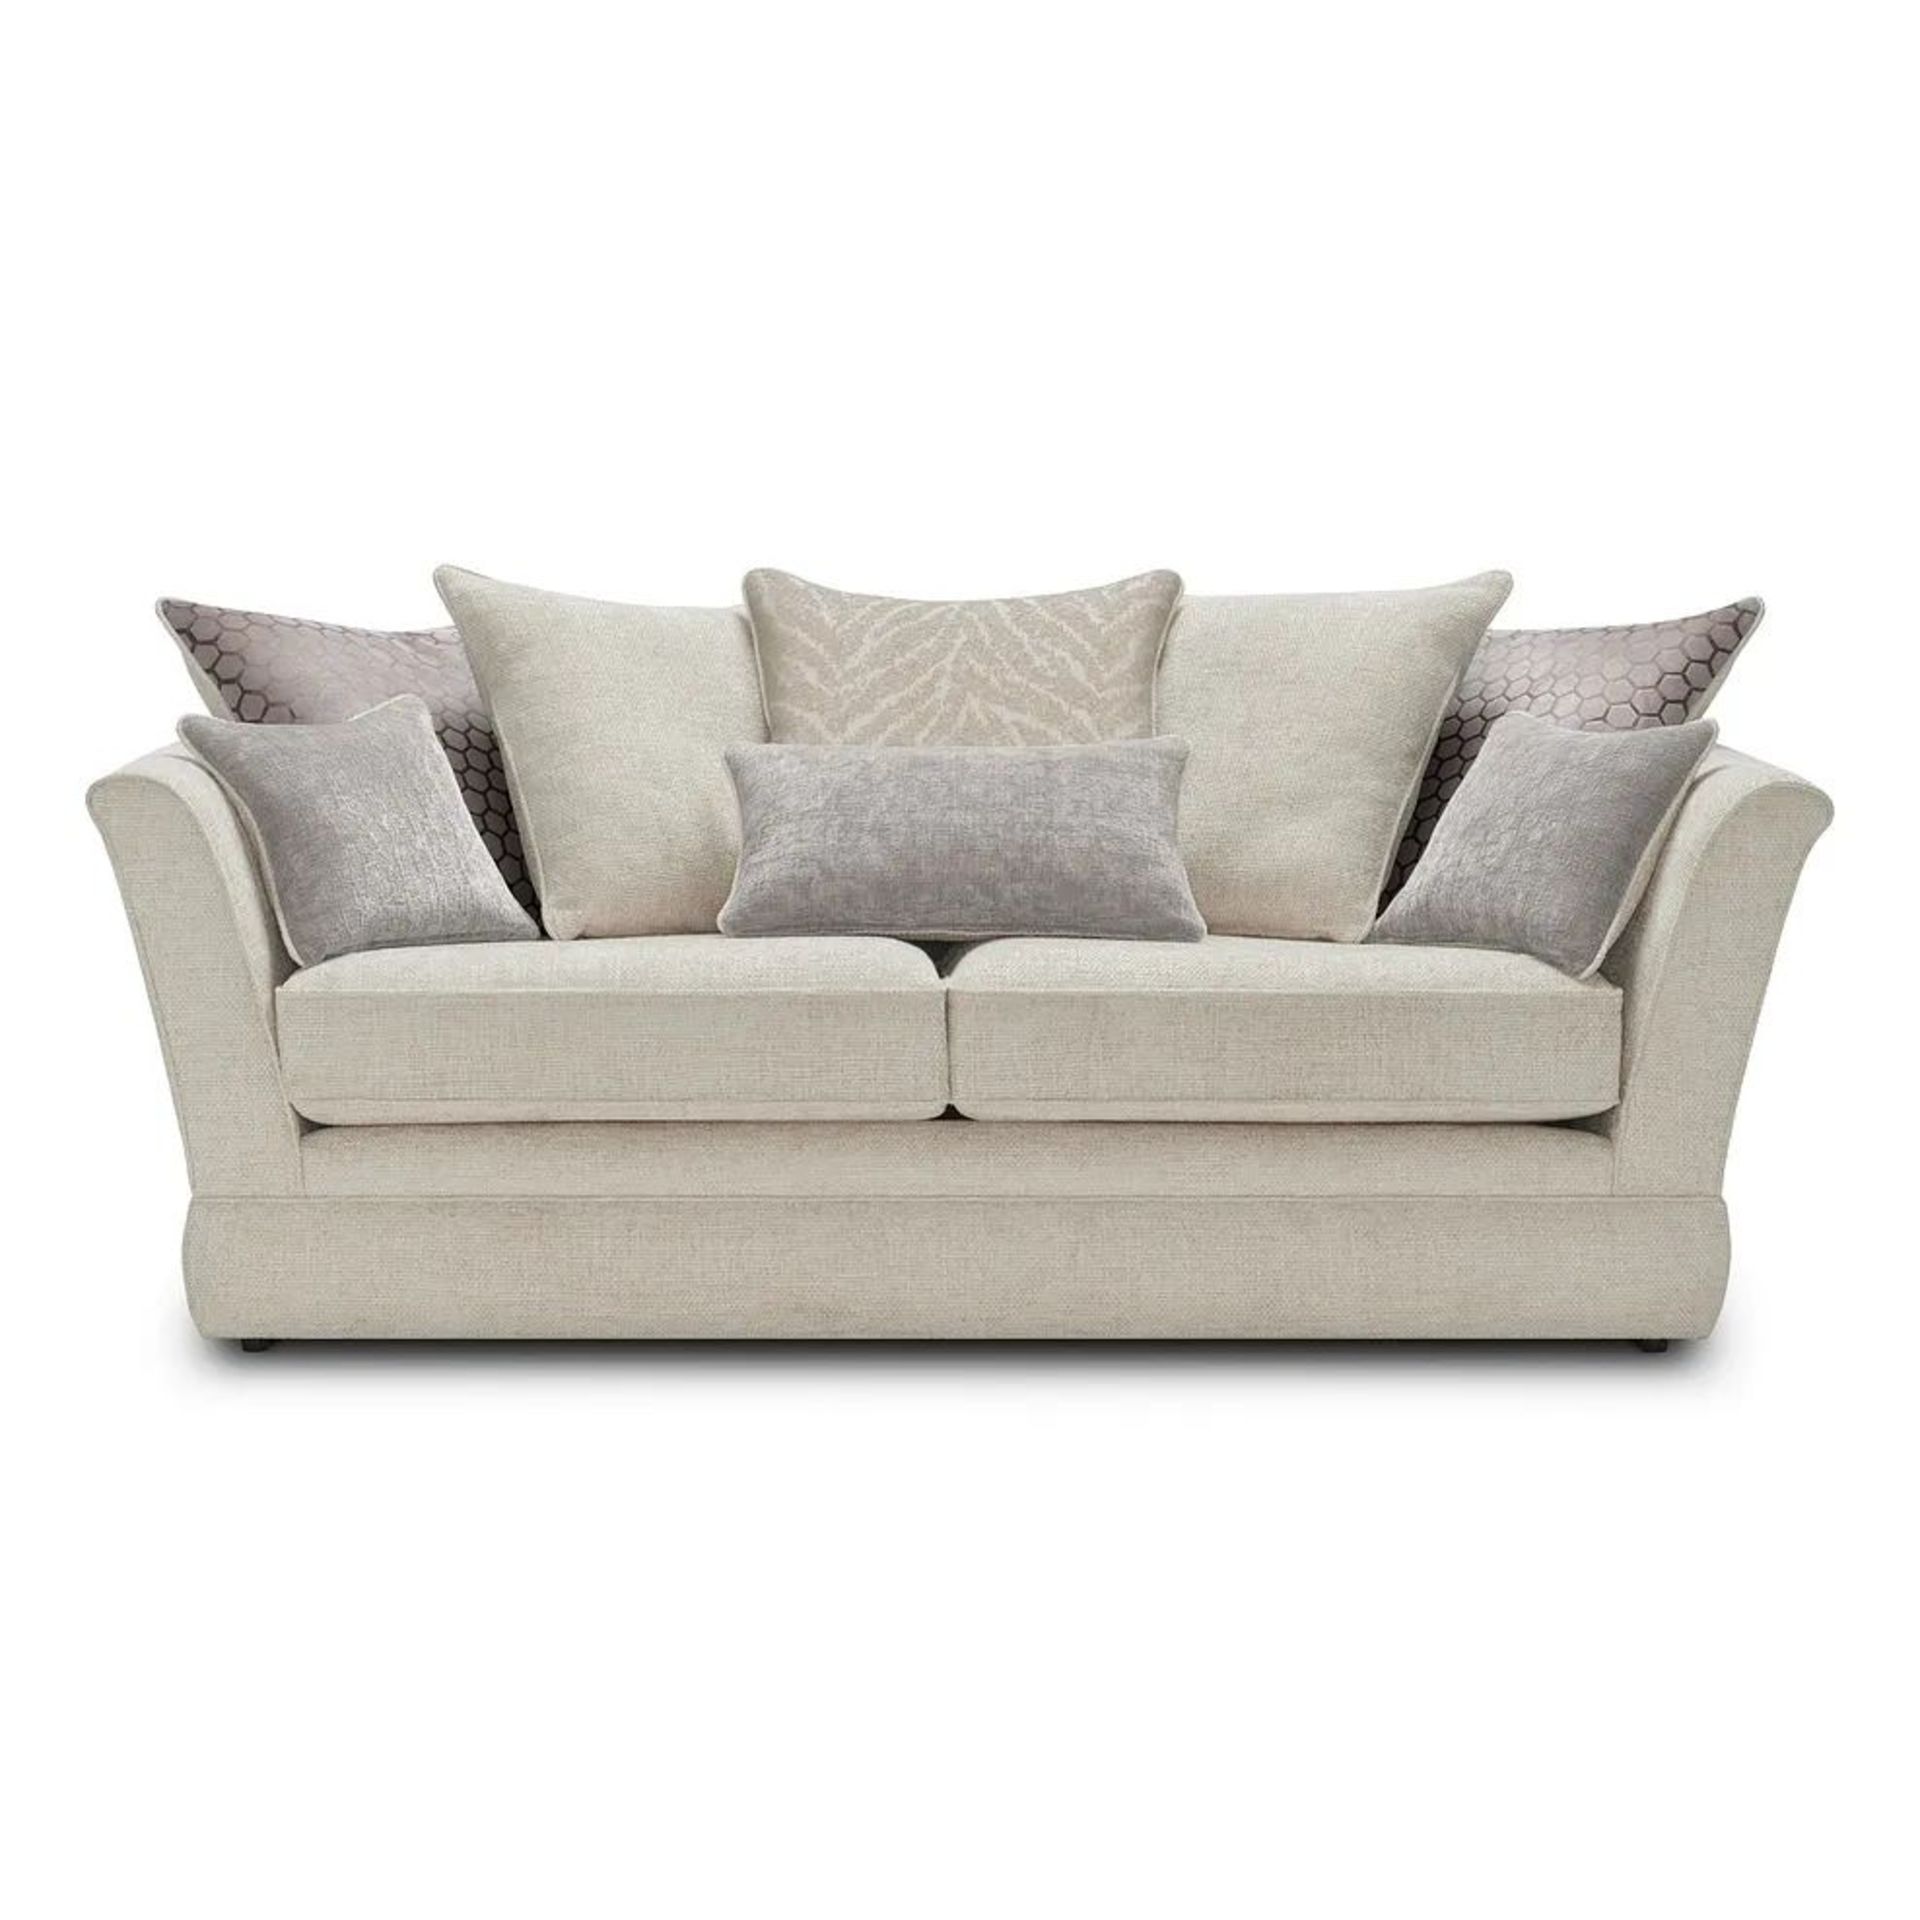 BRAND NEW CARRINGTON 3 Seater Pillow Back Sofa - NATURAL FABRIC. RRP £1099. Make our 3-seater pillow - Image 2 of 8